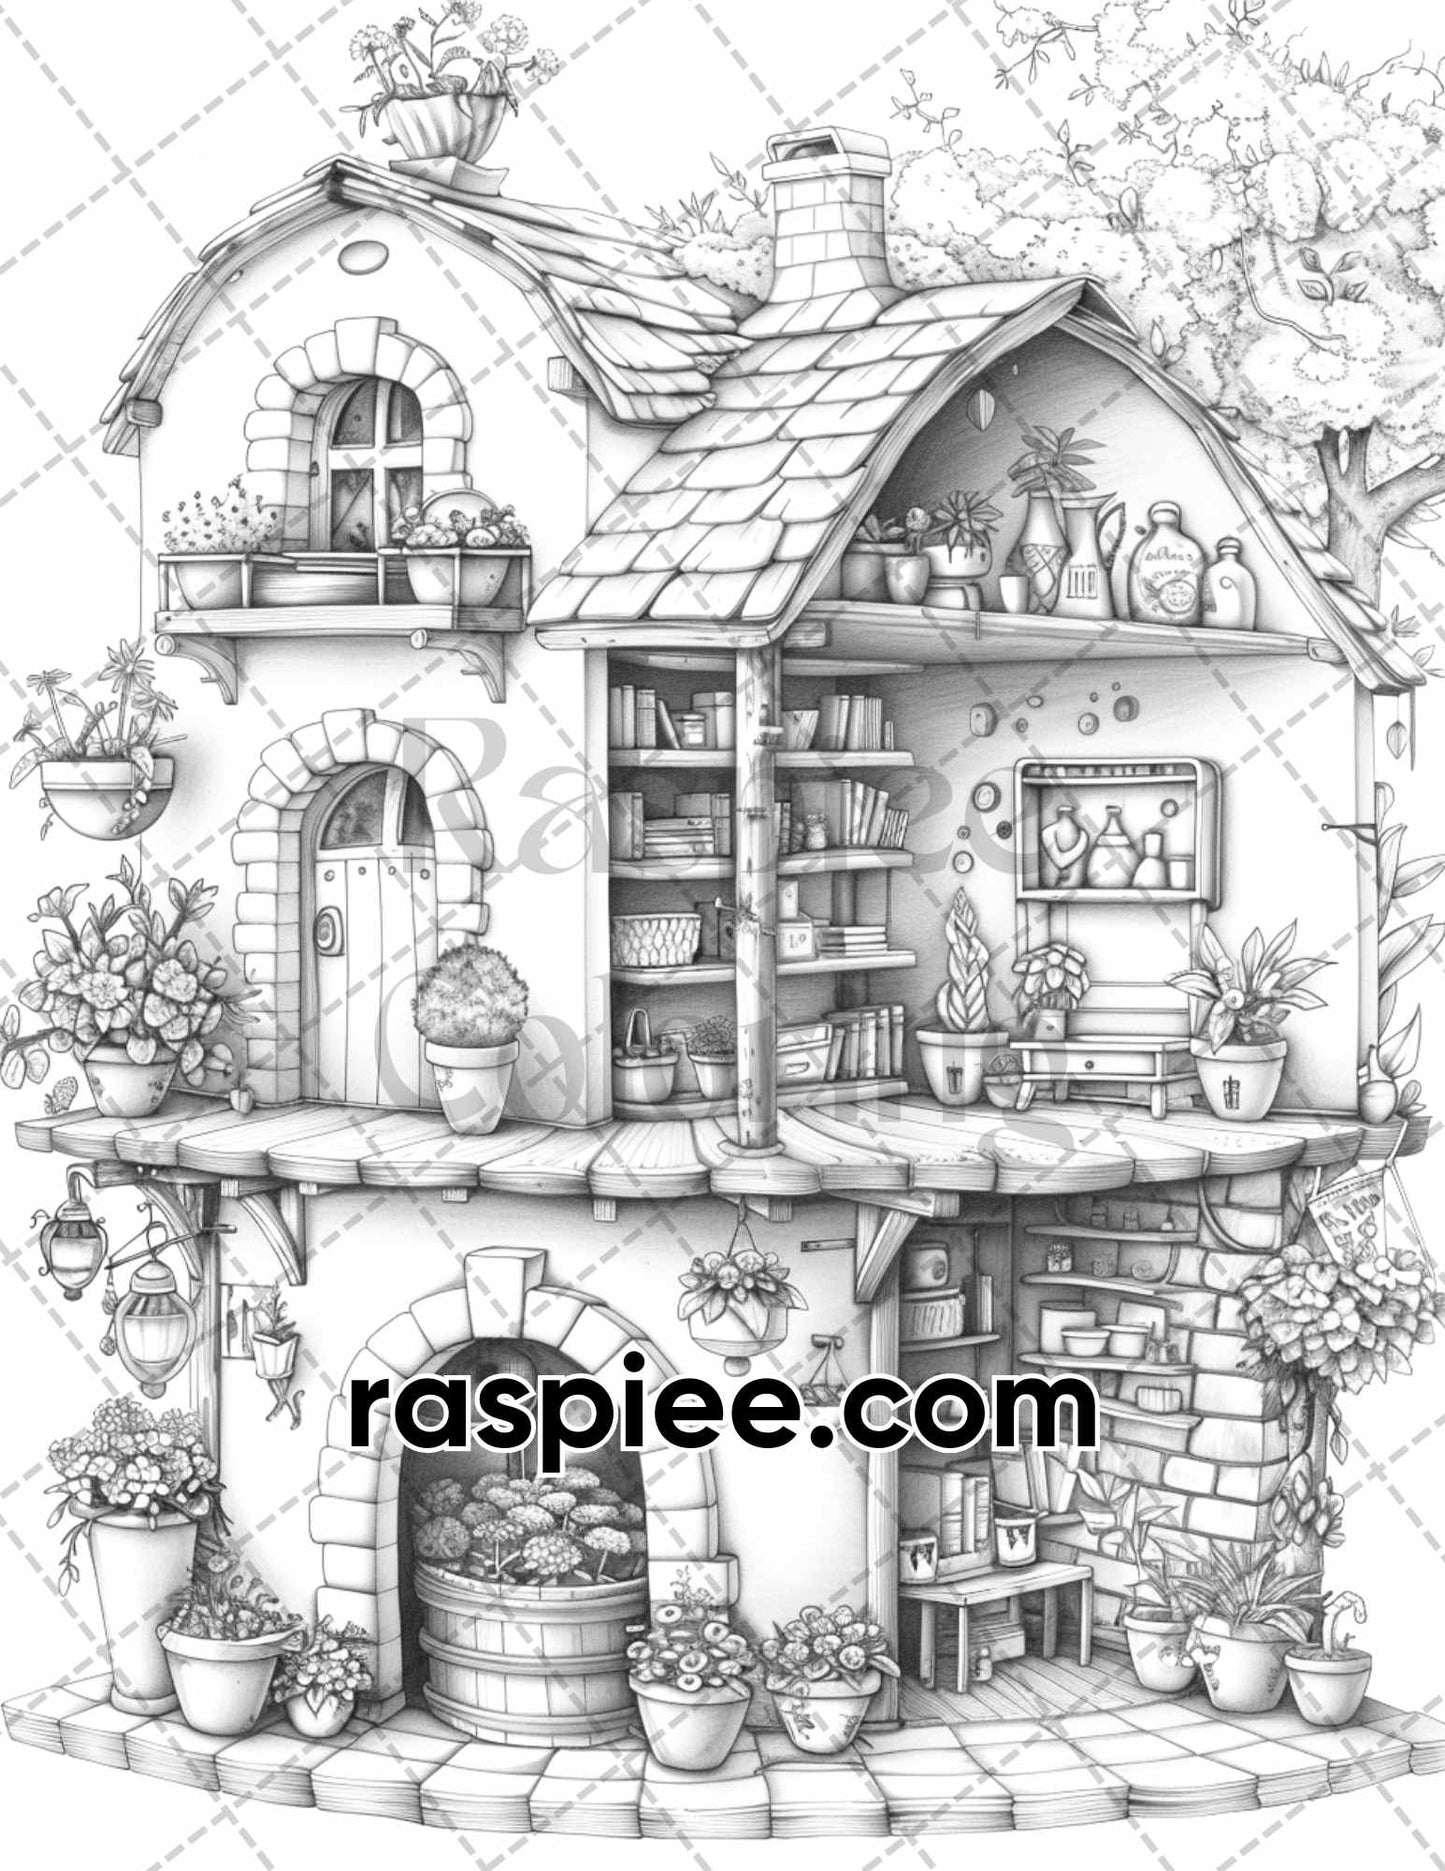 adult coloring pages, adult coloring sheets, adult coloring book pdf, adult coloring book printable, grayscale coloring pages, grayscale coloring books, Isometric House coloring pages for adults, Isometric House coloring book, grayscale illustration